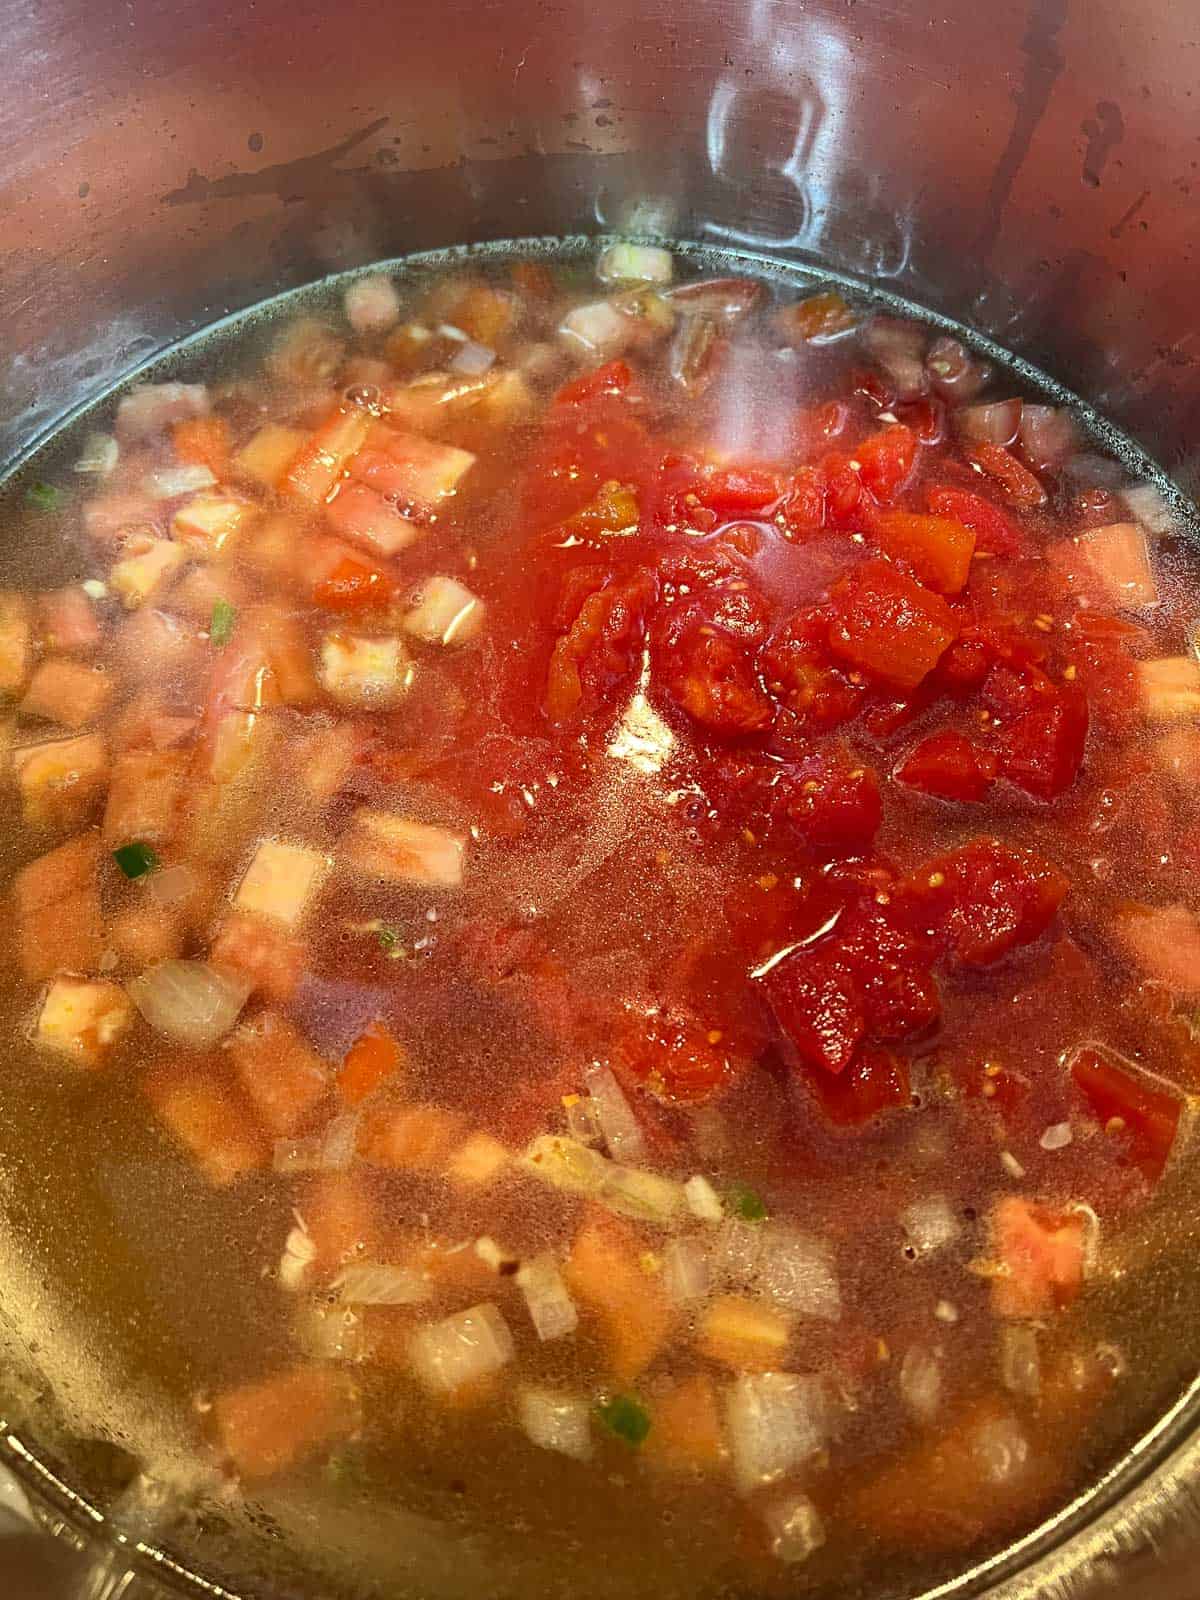 Broth and tomatoes added to the soup pot and simmering.